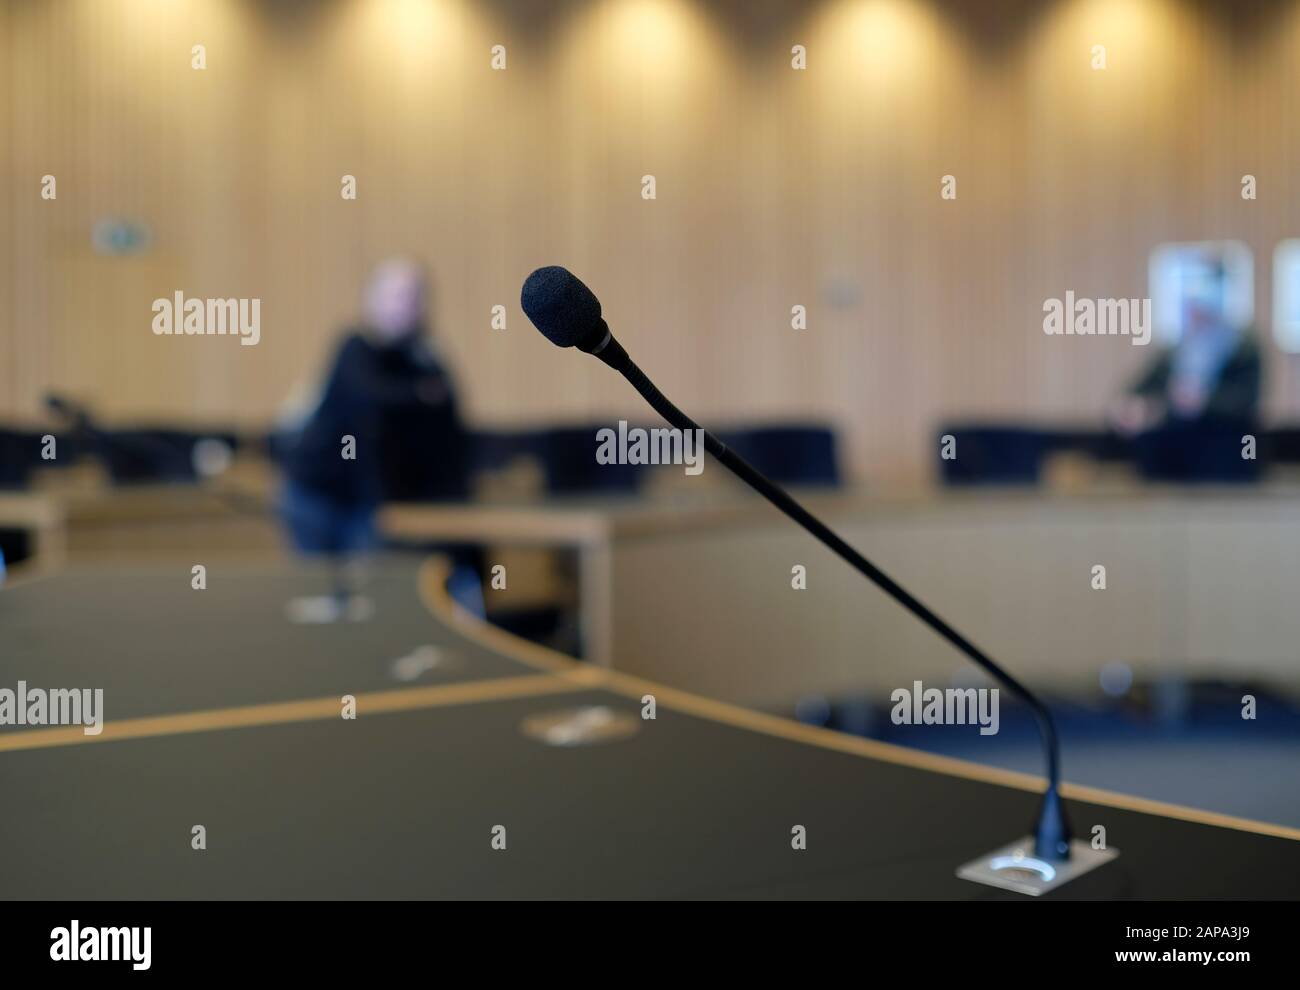 Conference room with wooden walls and microphones at each seat Stock Photo